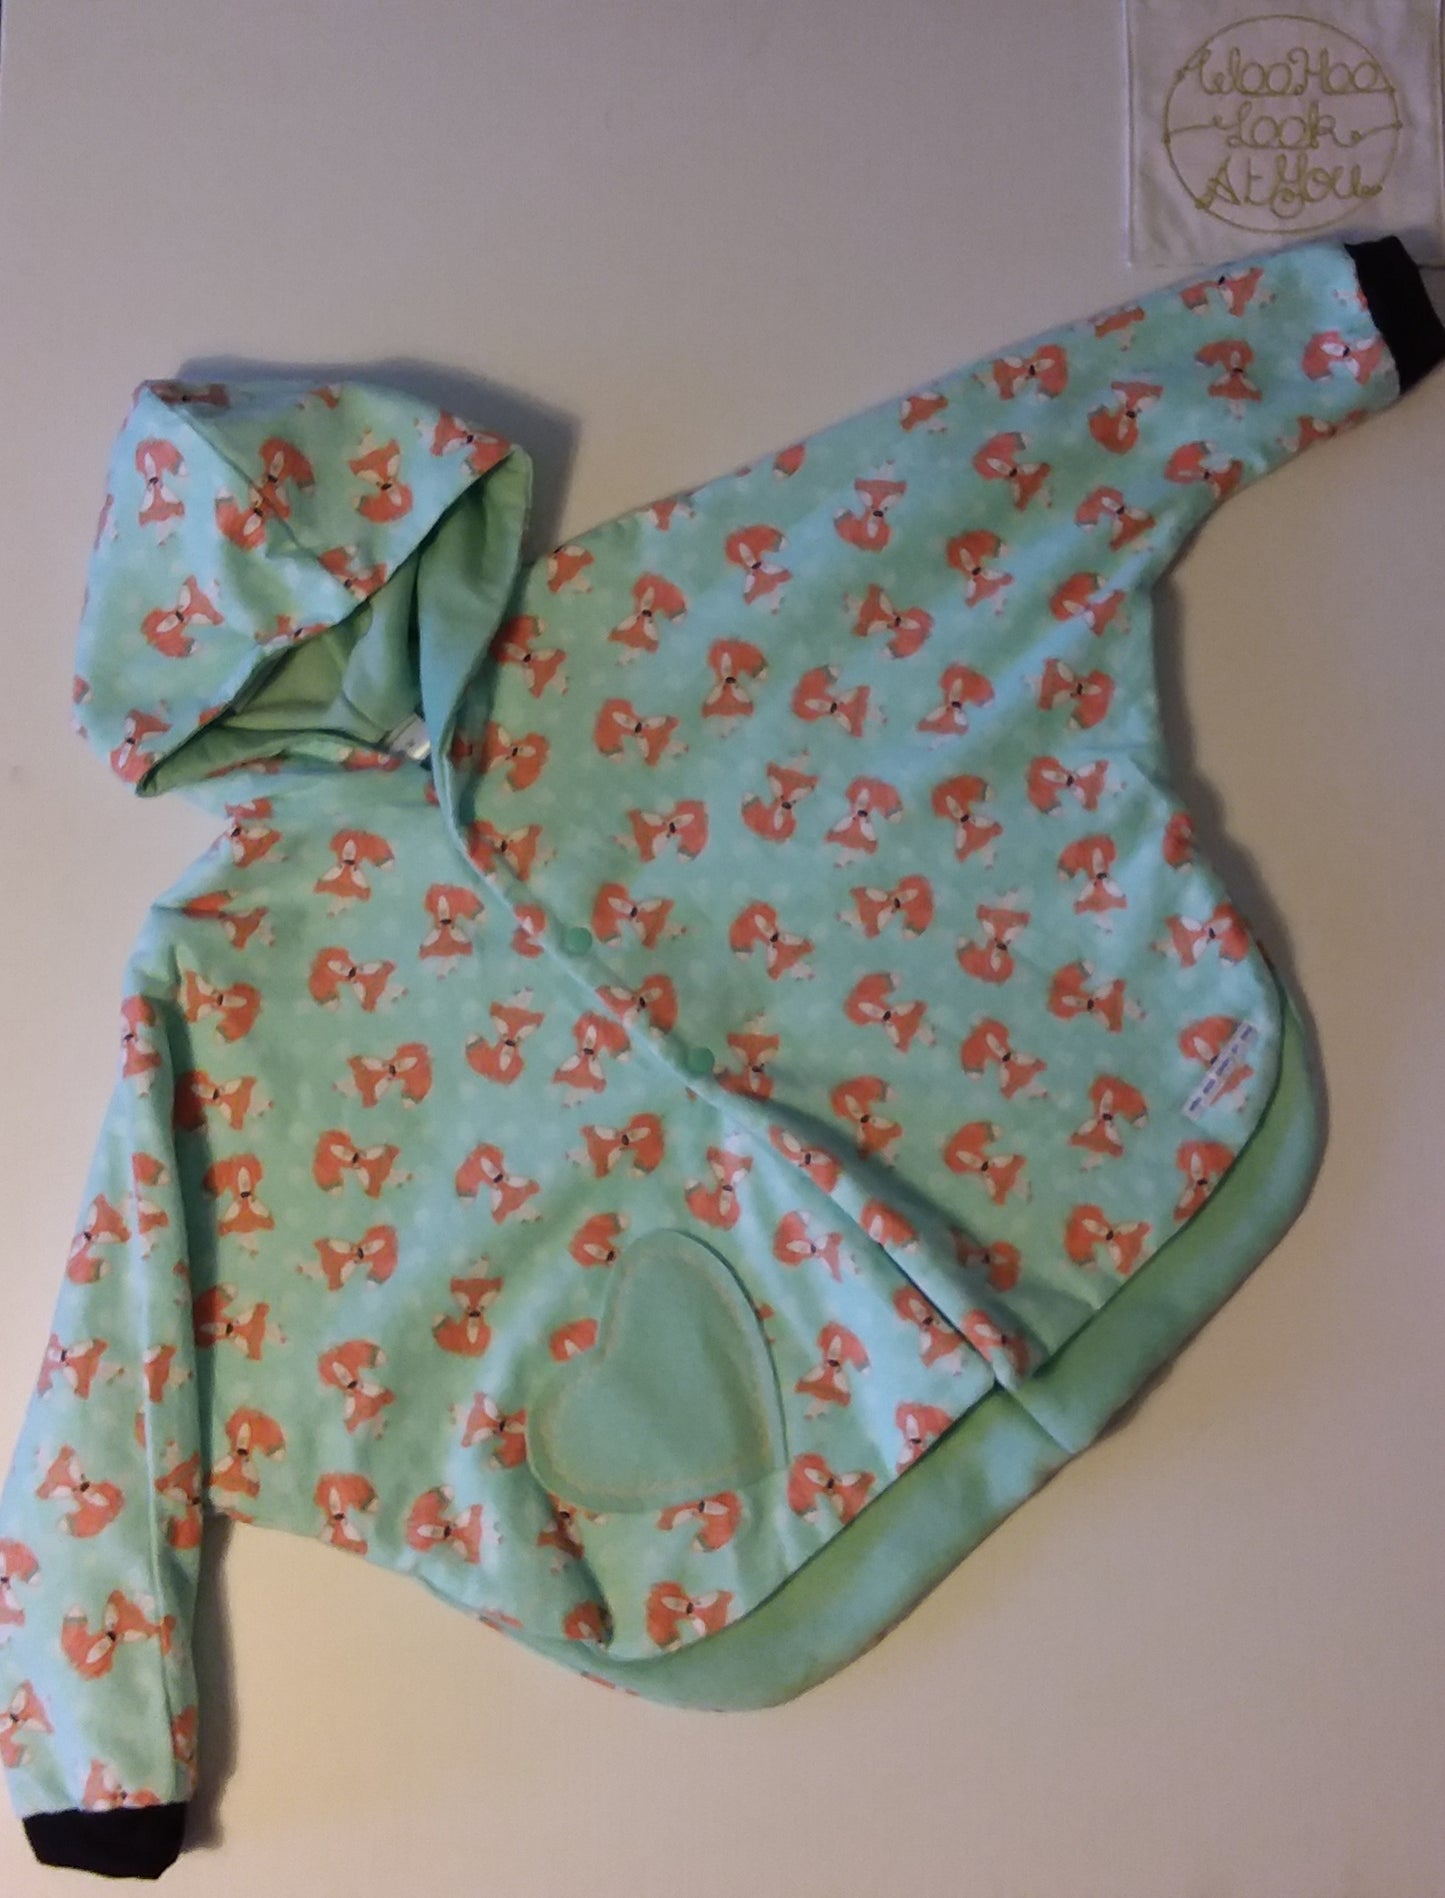 Coat - Poncho Coat/Jacket - Mint Green Lined, Fox Print, Hooded with Mint Green Heart Shape Pocket and Black Cuffs